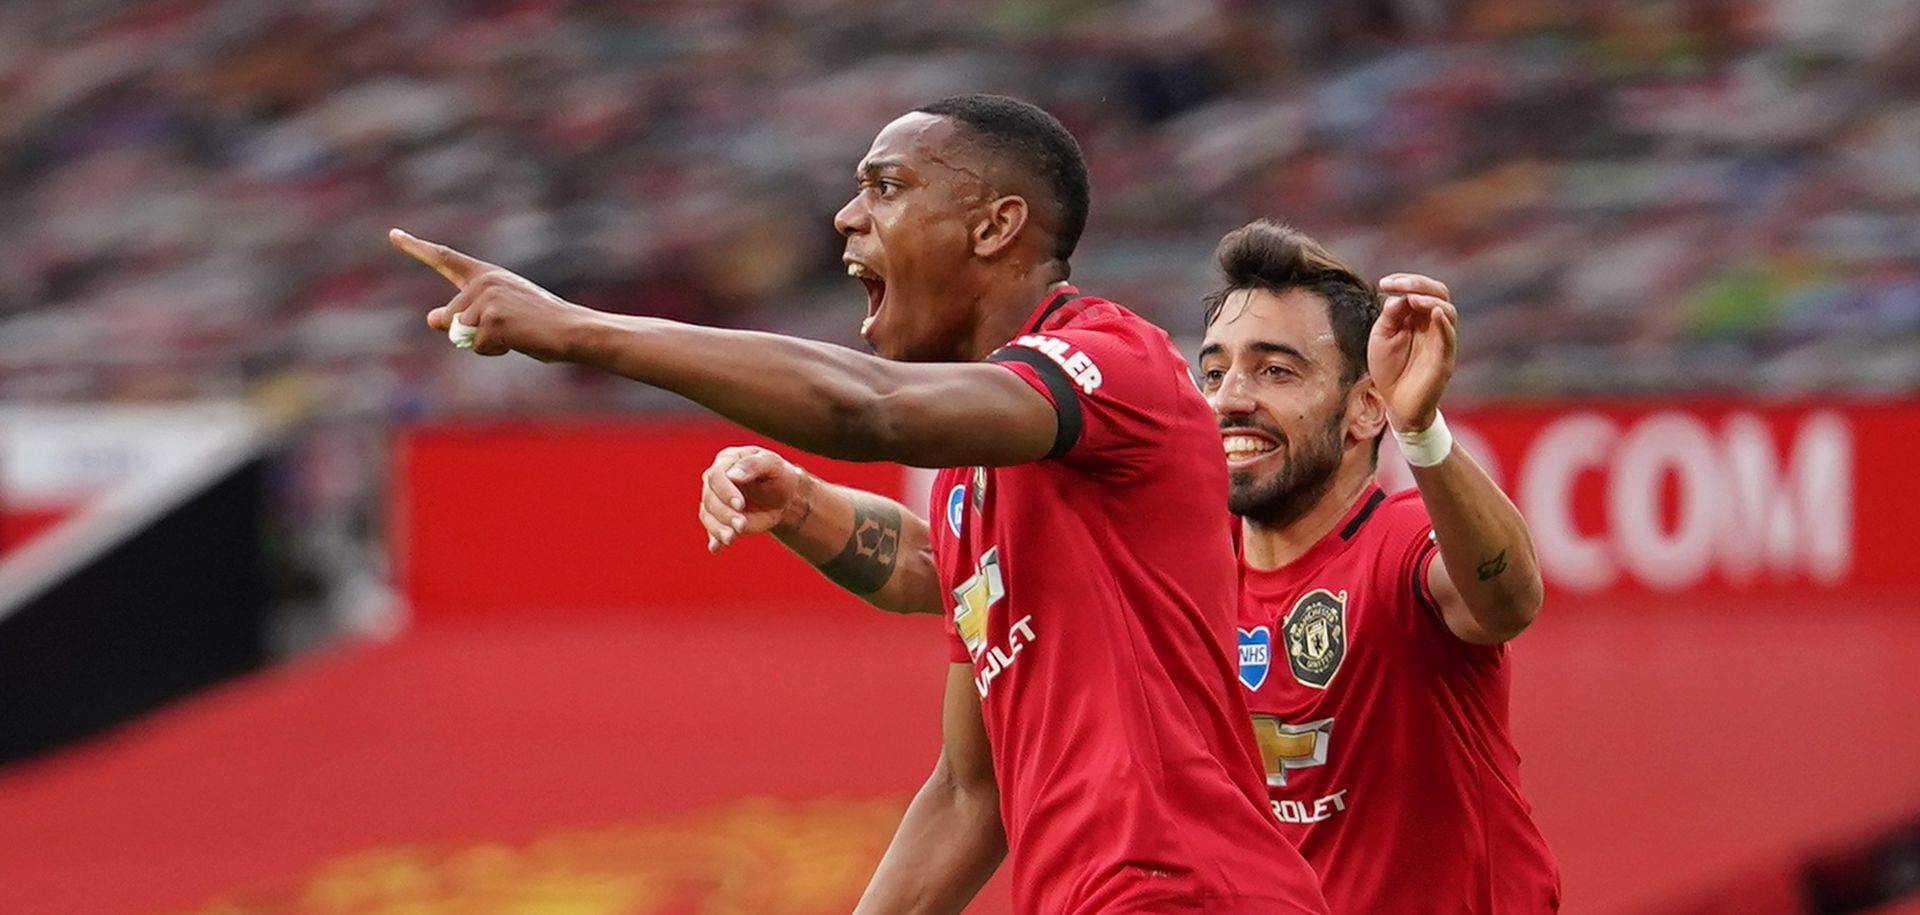 epa08544098 Anthony Martial of Manchester United (L) celebrates scoring his team's second goal  during the English Premier League match between Manchester United and Southampton FC in Manchester, Britain, 13 July 2020.  EPA/Dave Thompson/NMC/Pool EDITORIAL USE ONLY. No use with unauthorized audio, video, data, fixture lists, club/league logos or 'live' services. Online in-match use limited to 120 images, no video emulation. No use in betting, games or single club/league/player publications.